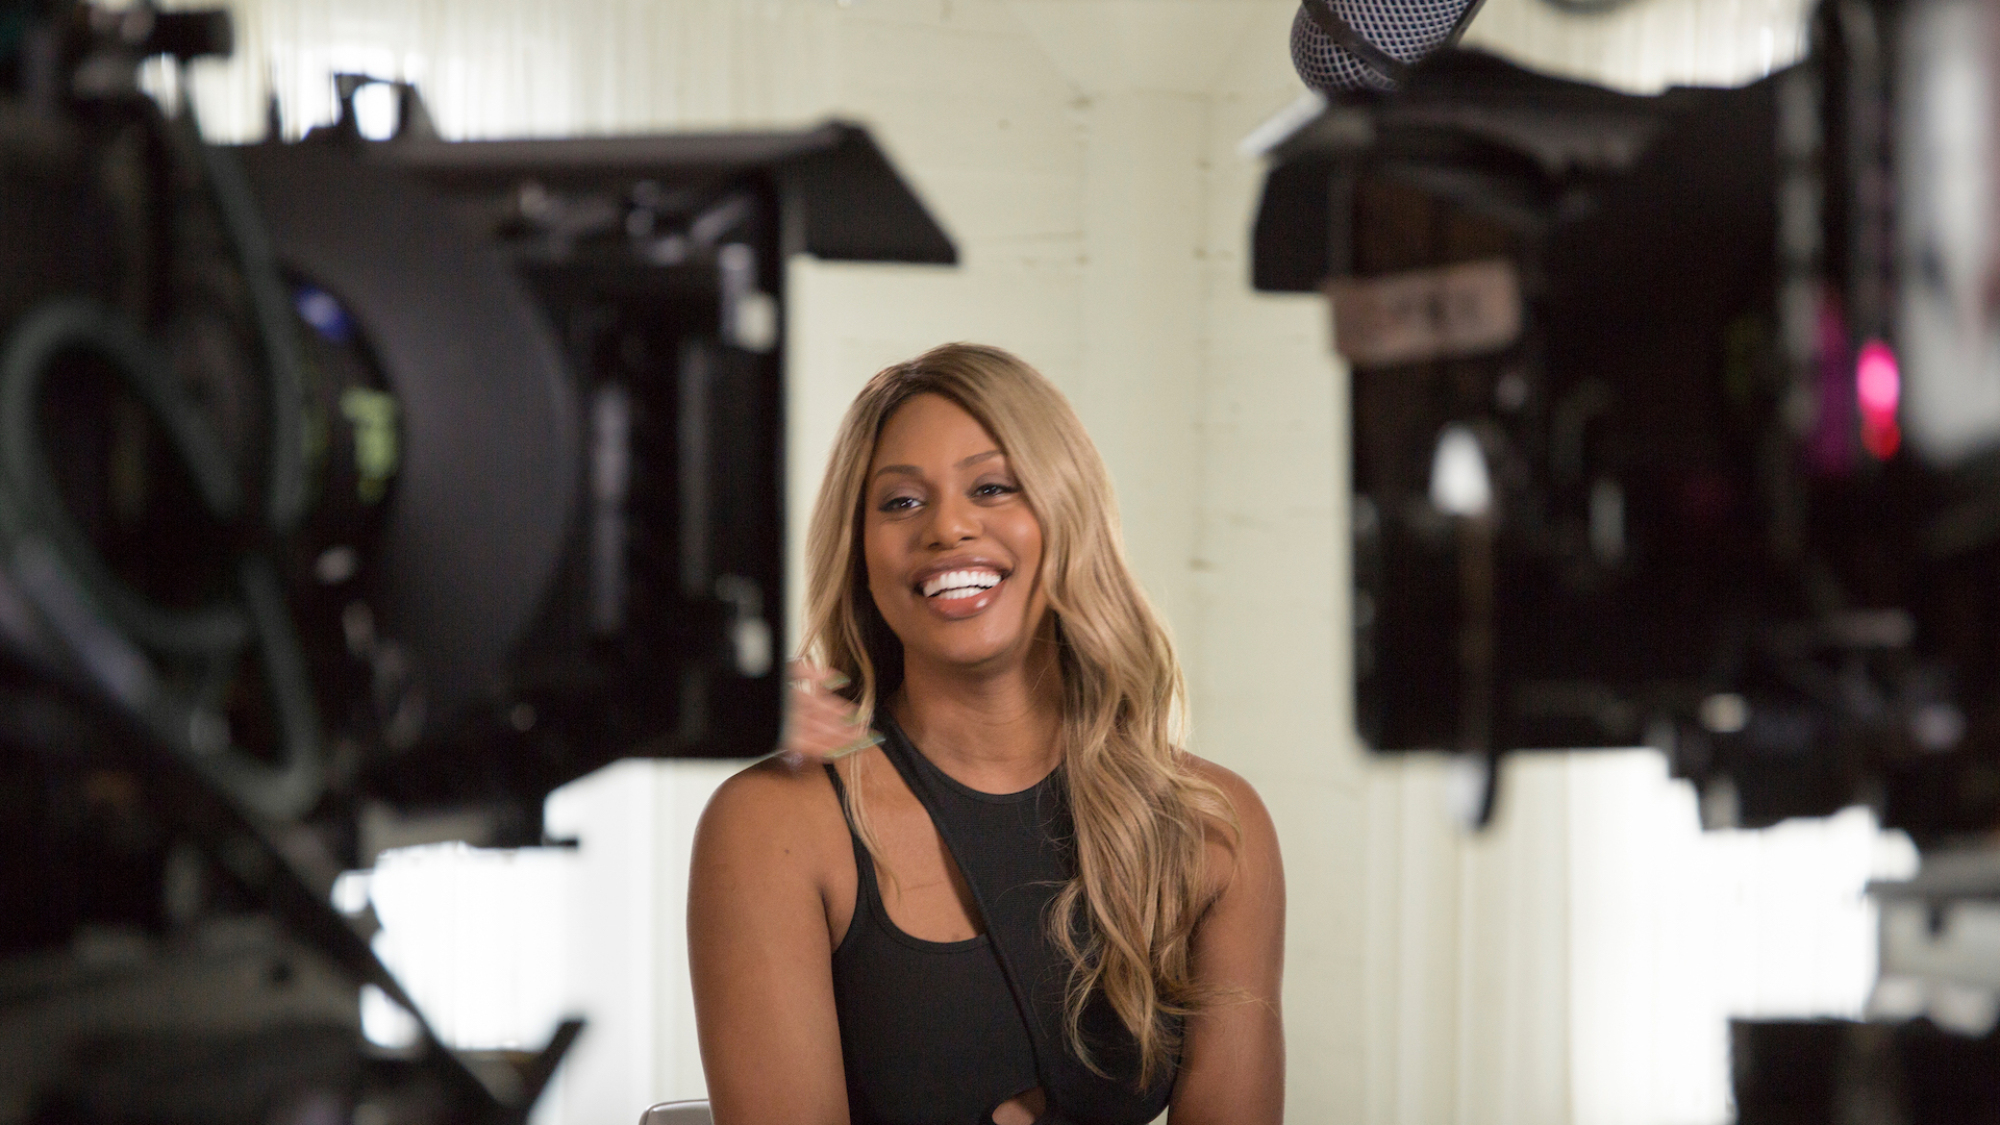 "Orange Is the New Black" star Laverne Cox laughs while being interviewed between two cameras in the documentary "Disclosure"